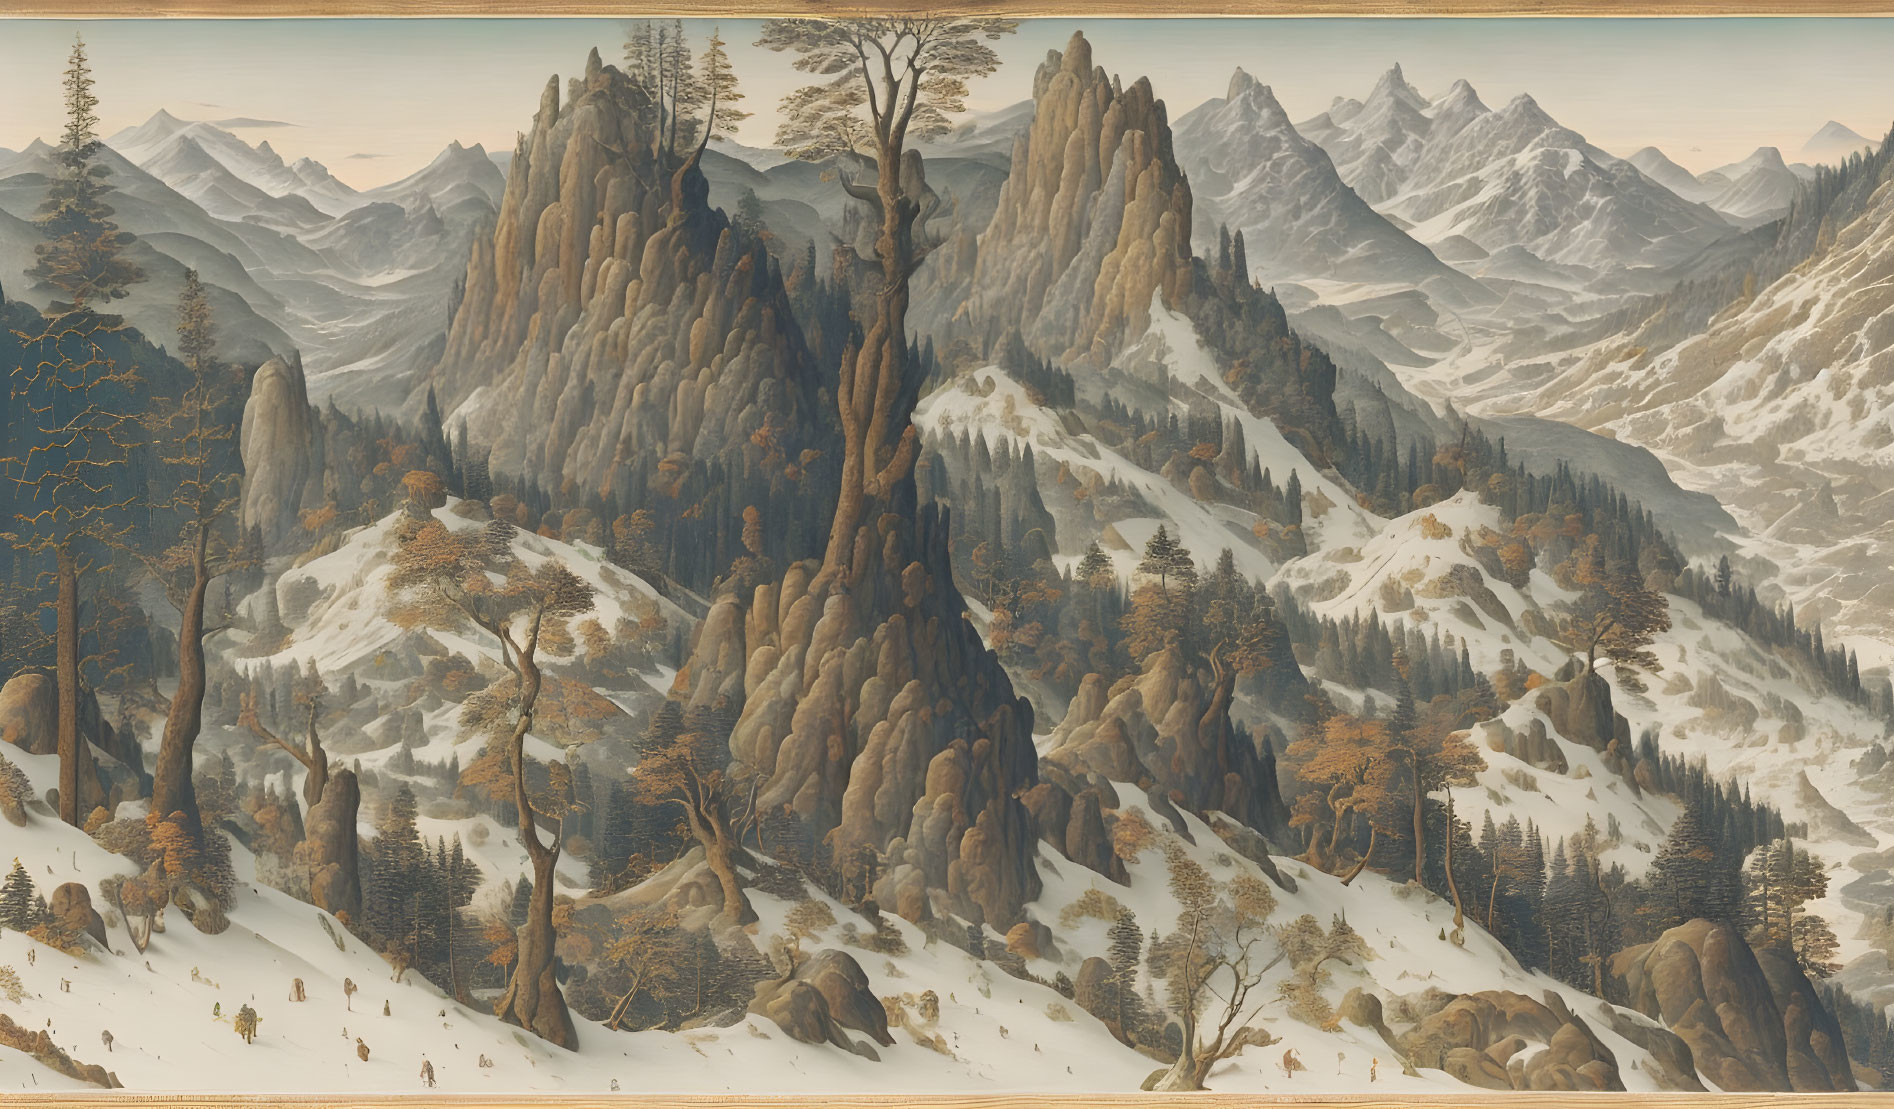 Panoramic landscape painting of rugged mountains & snow-capped peaks